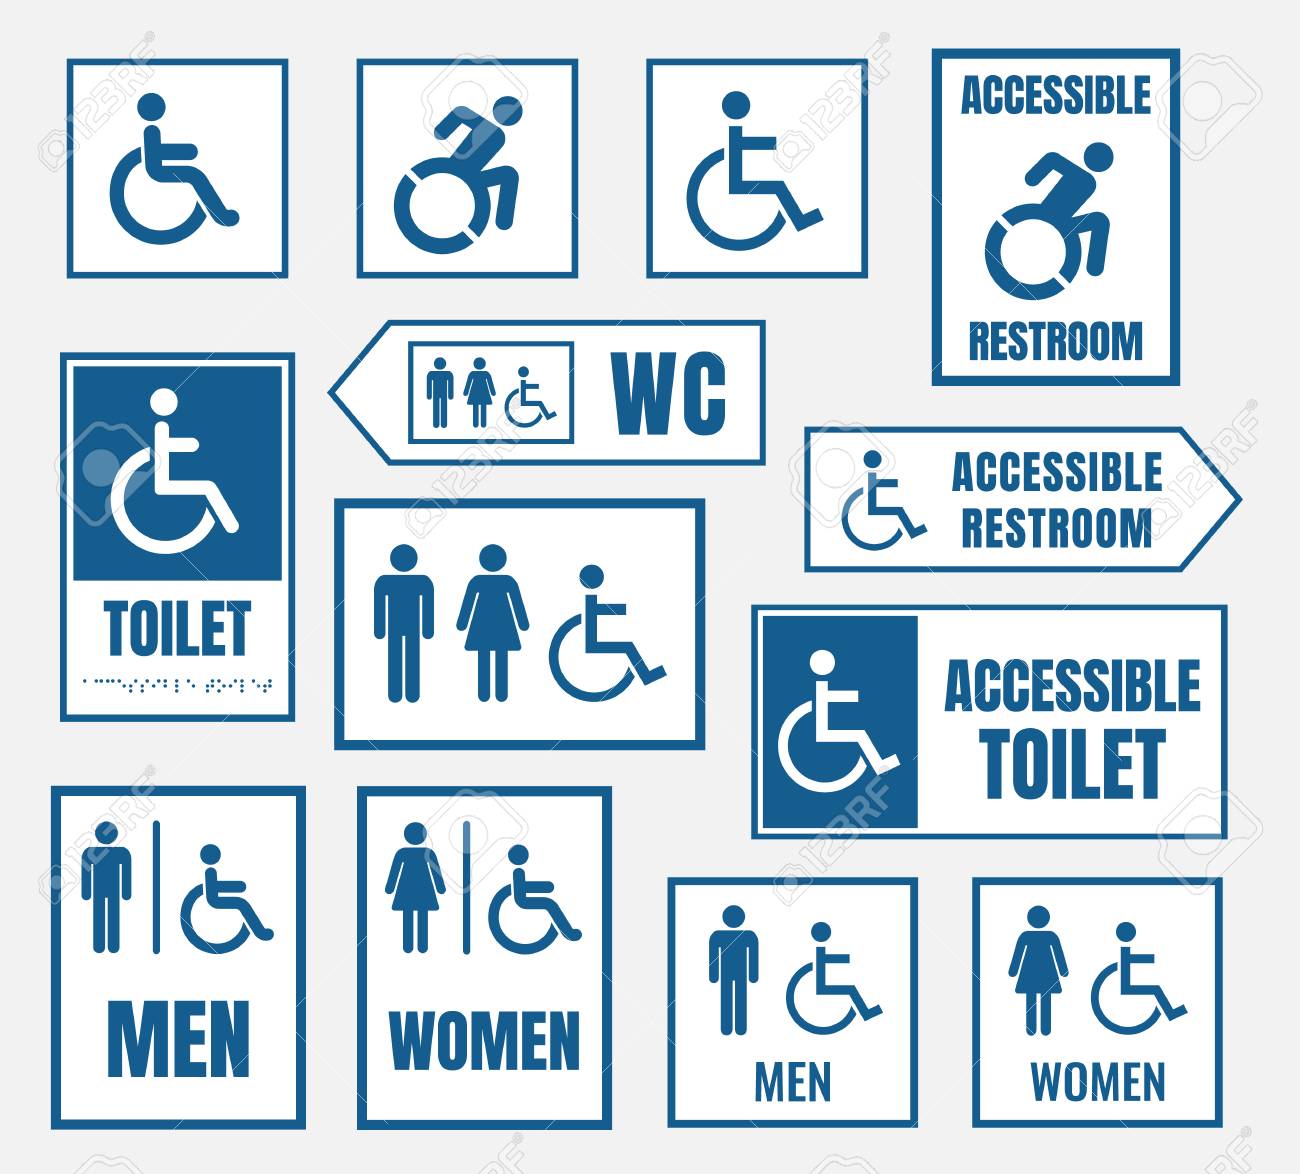 accessibility Rest room banner designs